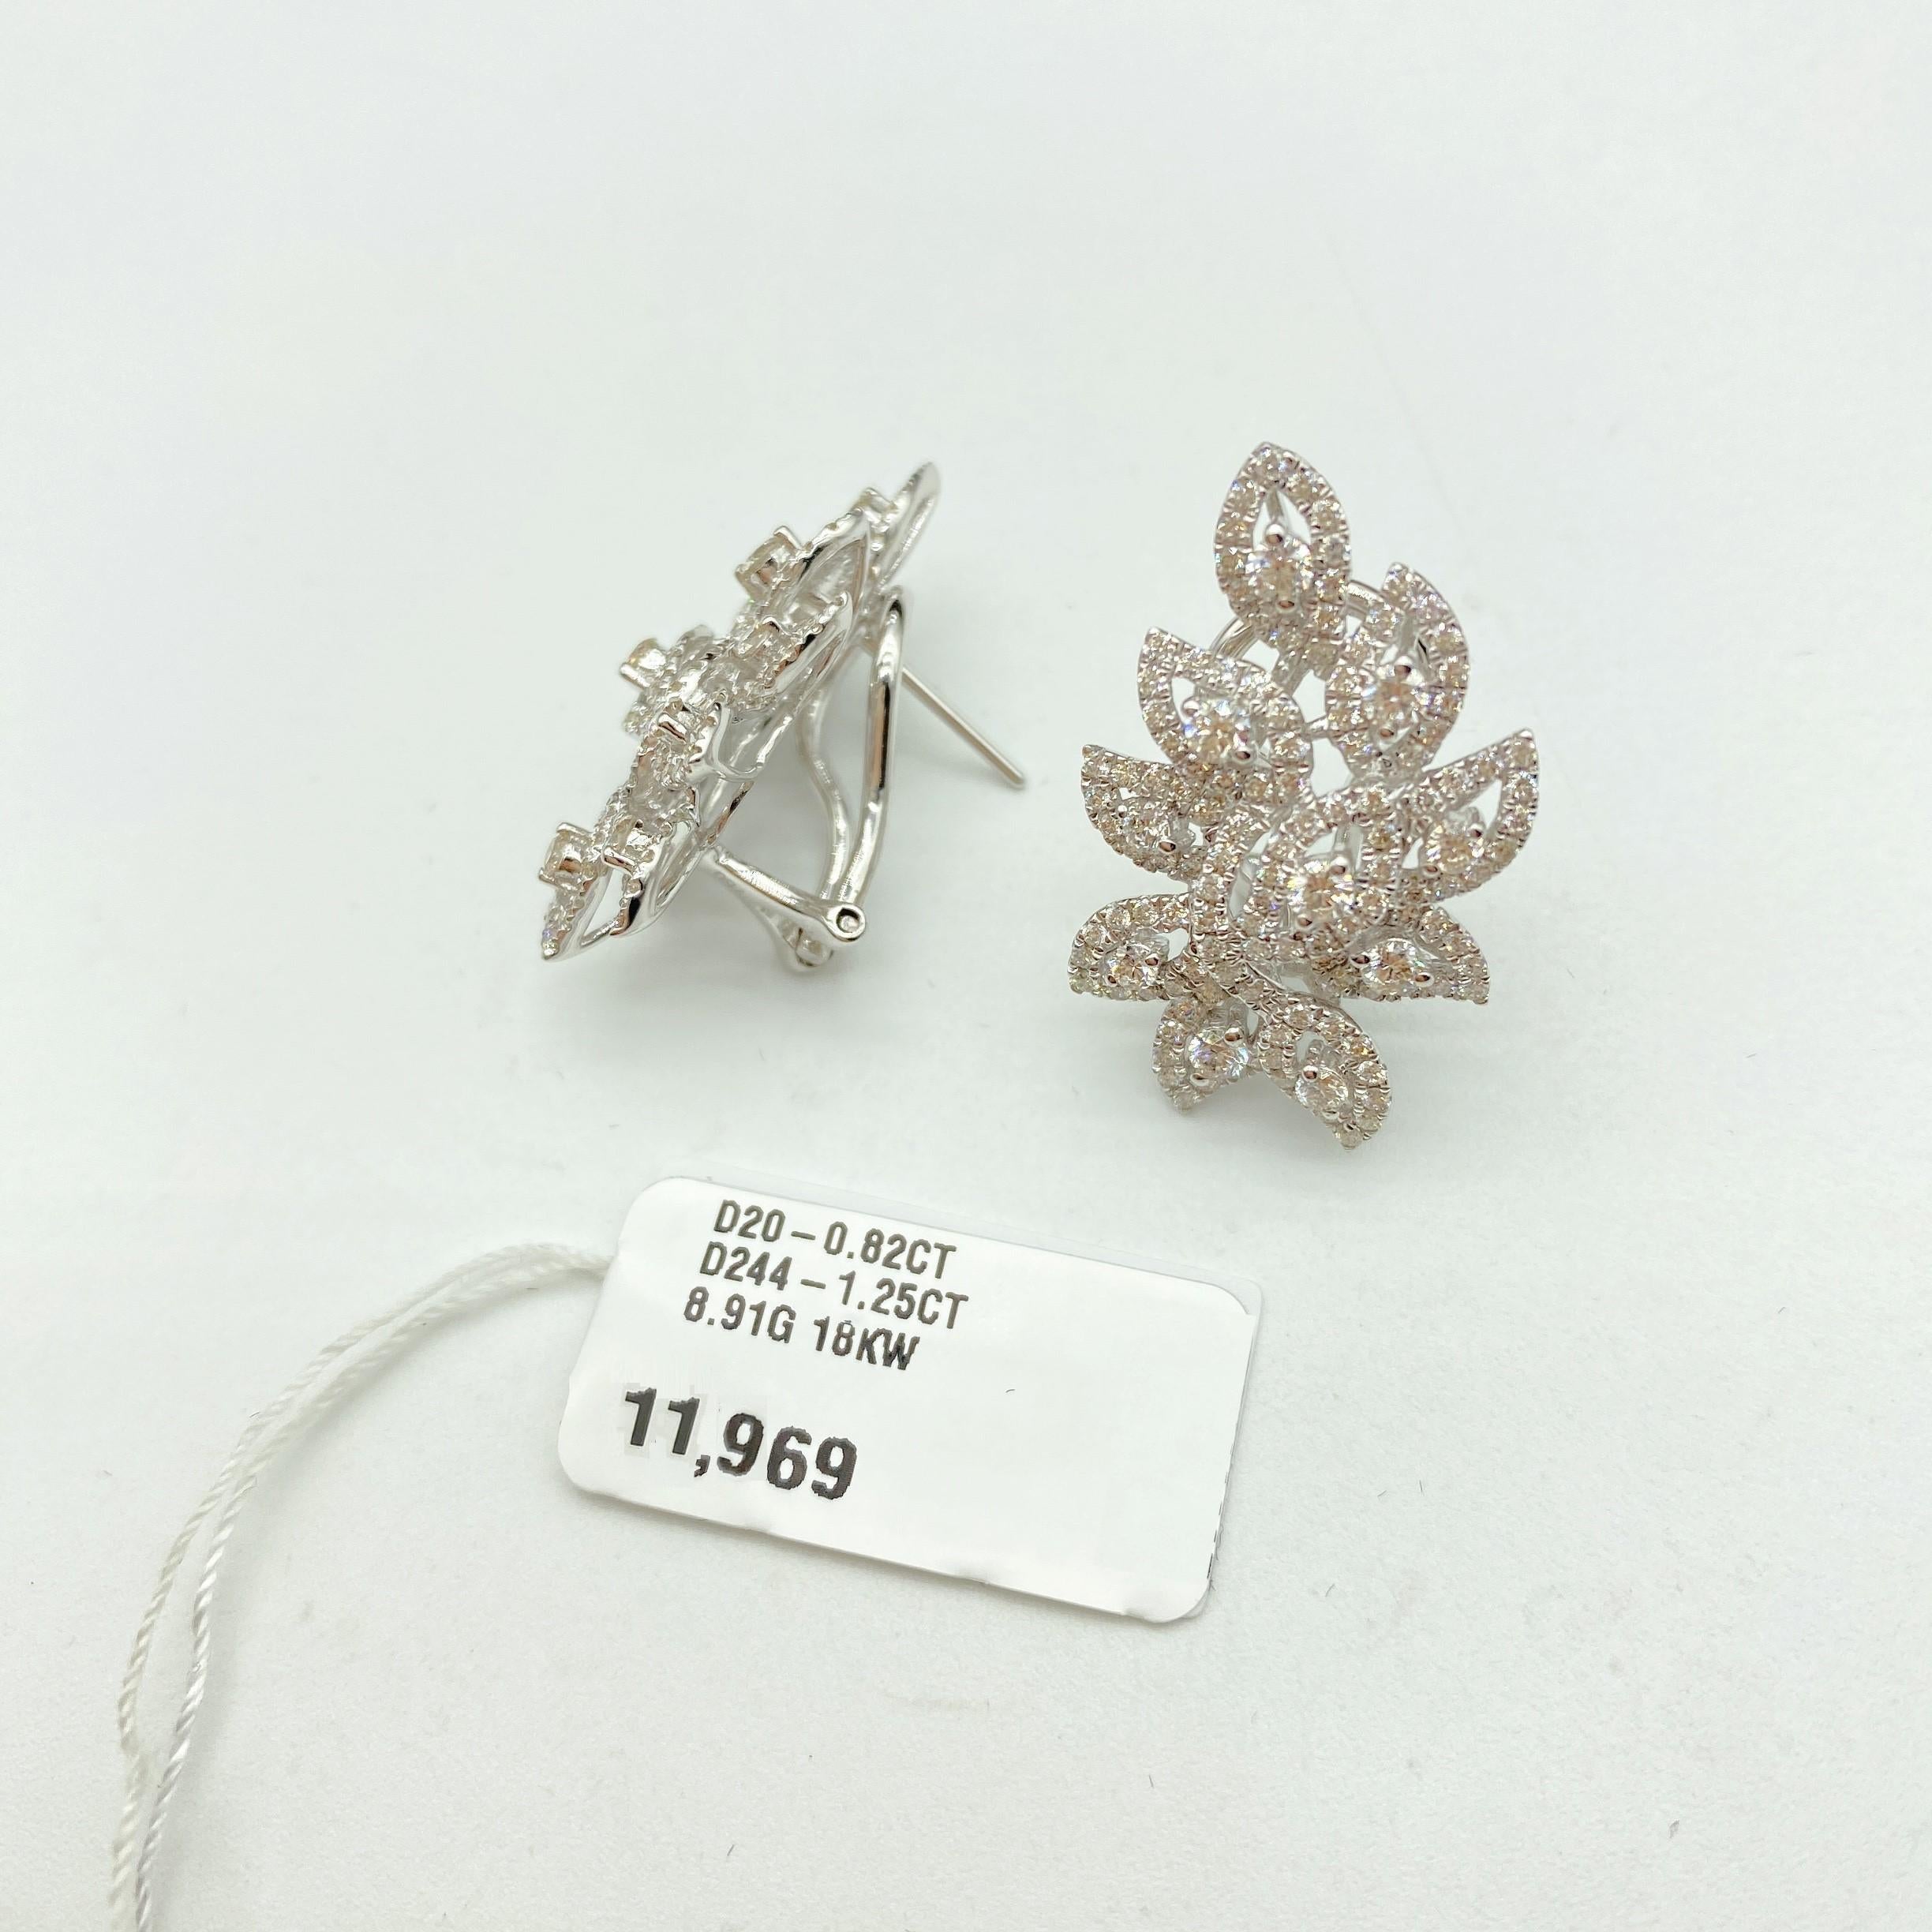 Round Cut NWT $11, 969 18KT Gold Rare Fancy Gorgeous Glittering Leaf Diamond Earrings For Sale